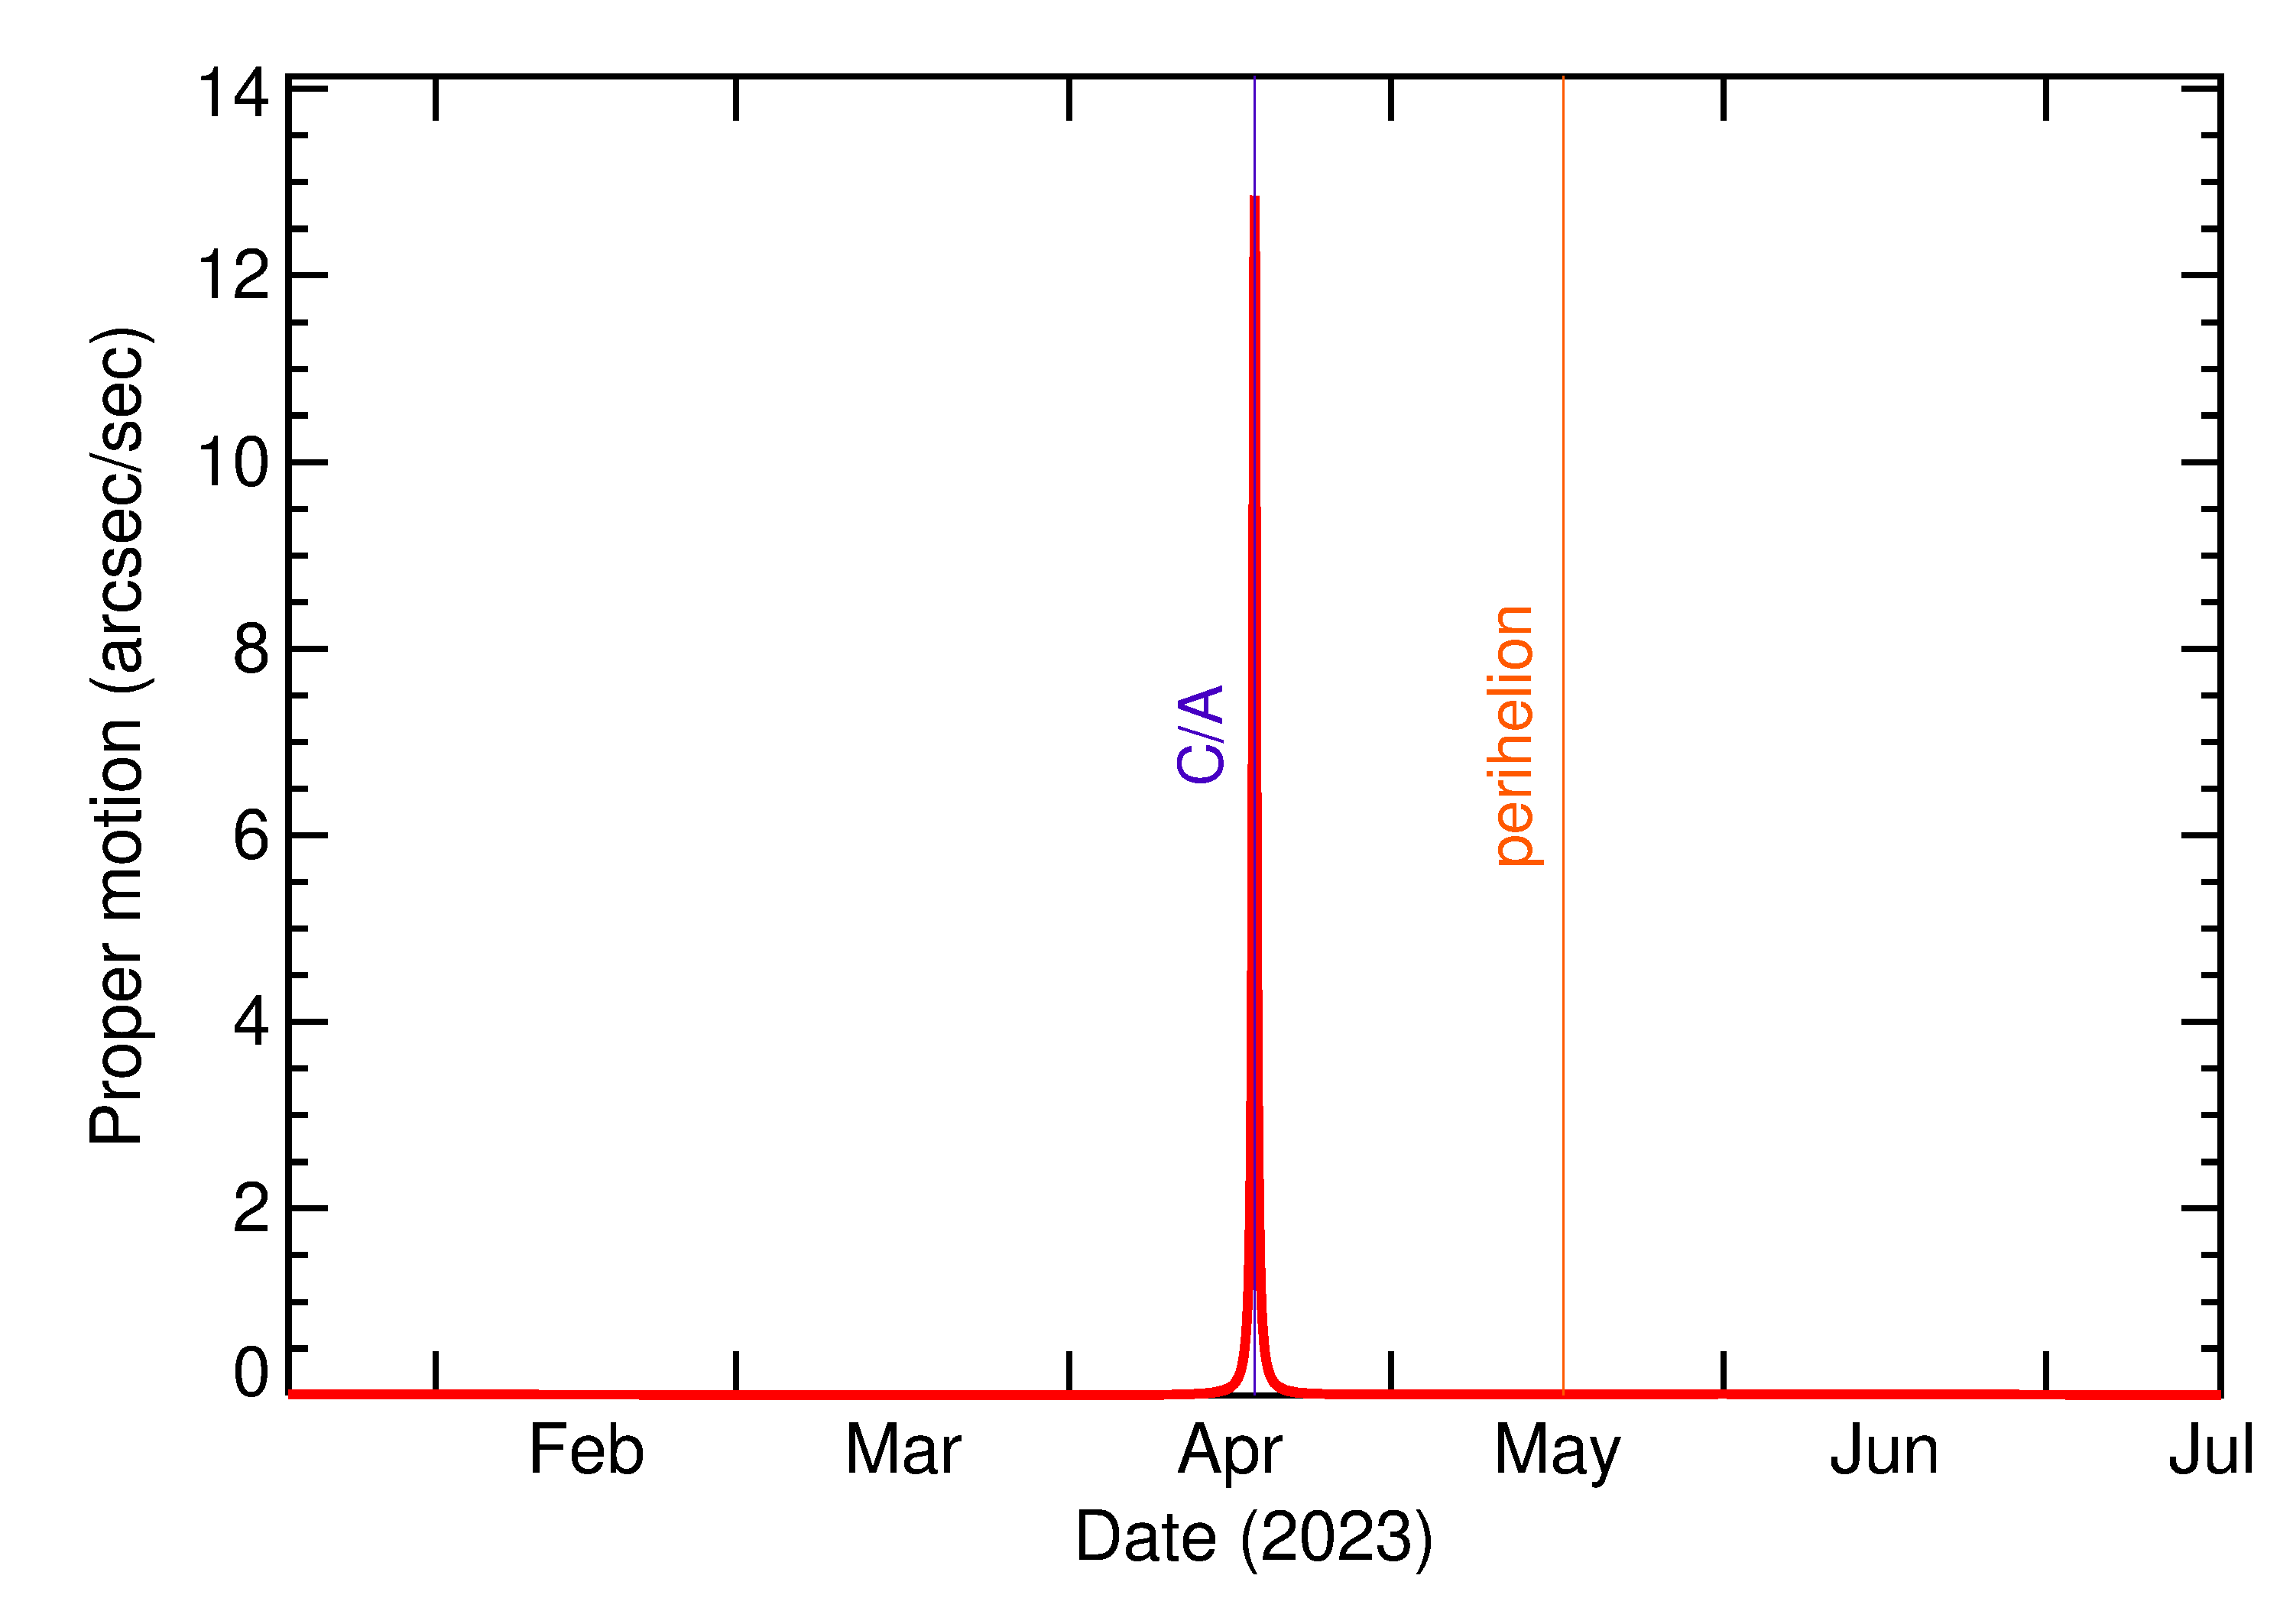 Proper motion rate of 2023 HB in the months around closest approach